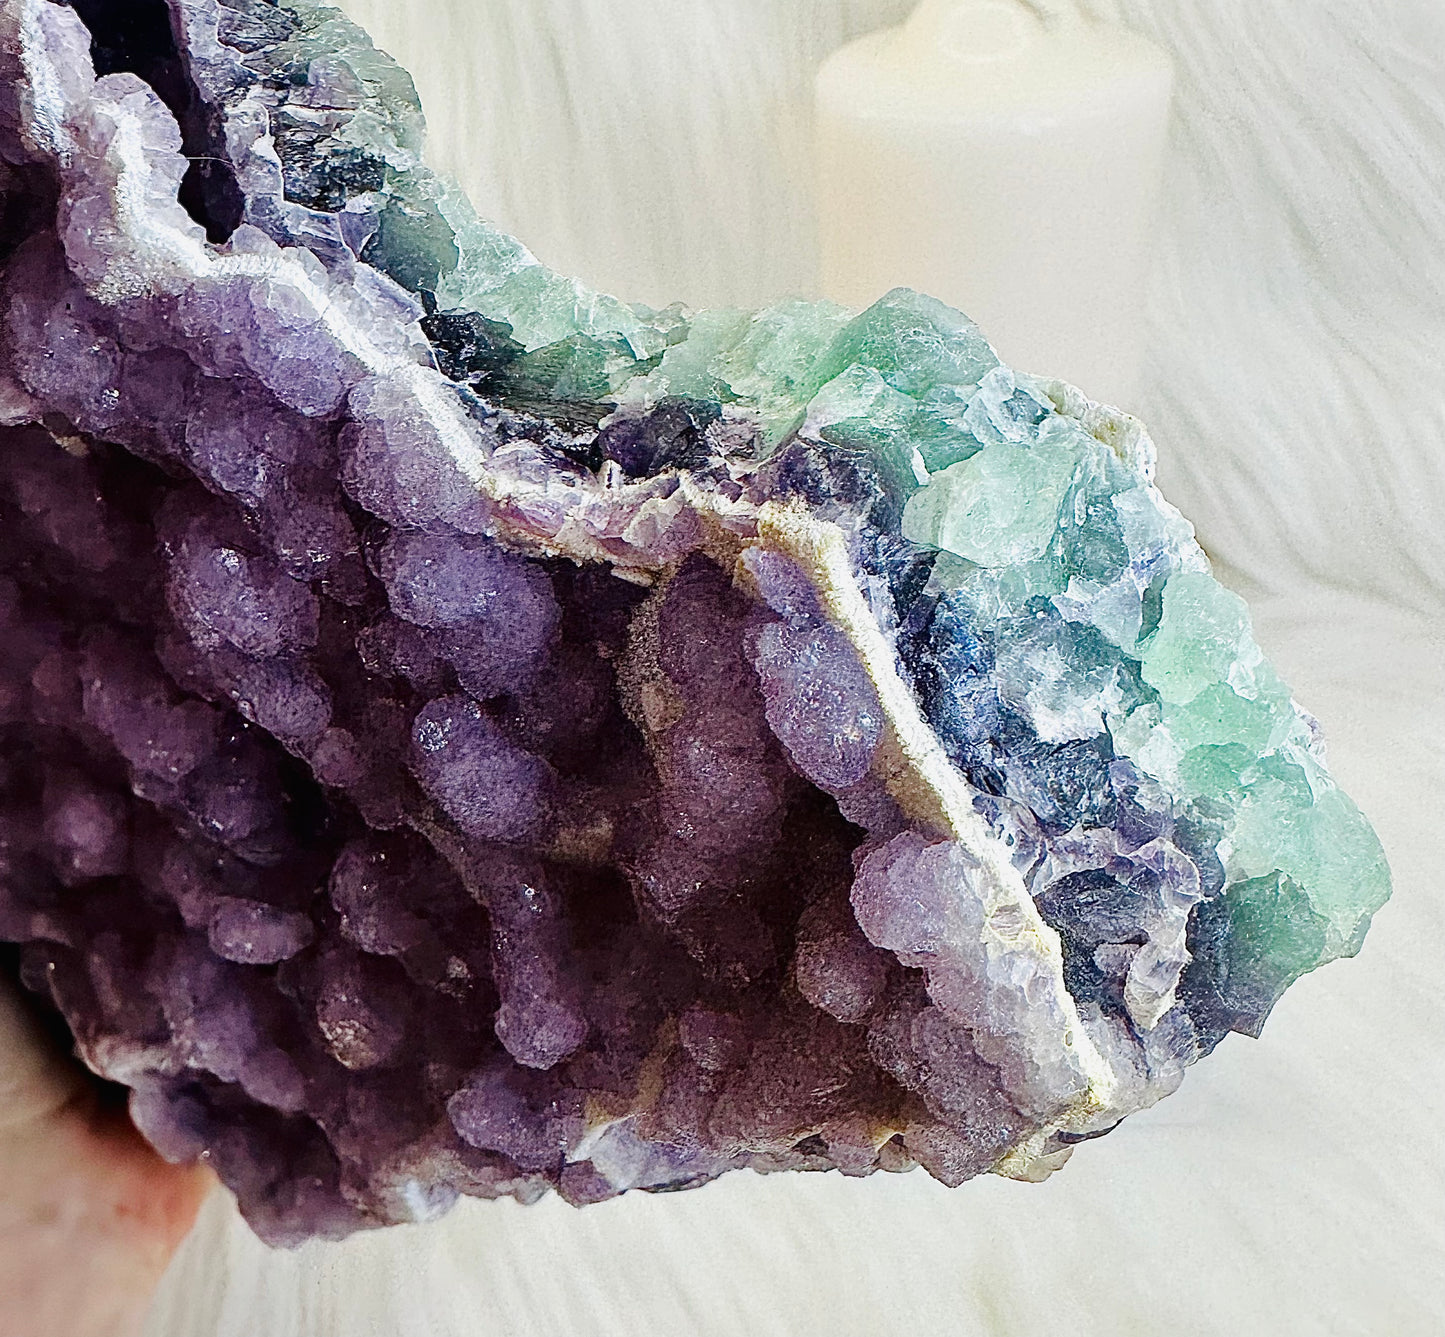 ⚜️ SALE ⚜️ Classy & Fabulous Ultimate Huge 2.8KG Natural Sugar Fluorite Specimen | Slab From Brazil, She Is Purple On Top With Rainbow Colours Through The Sides. She is 23cm & Is Magical Perfection!!!!